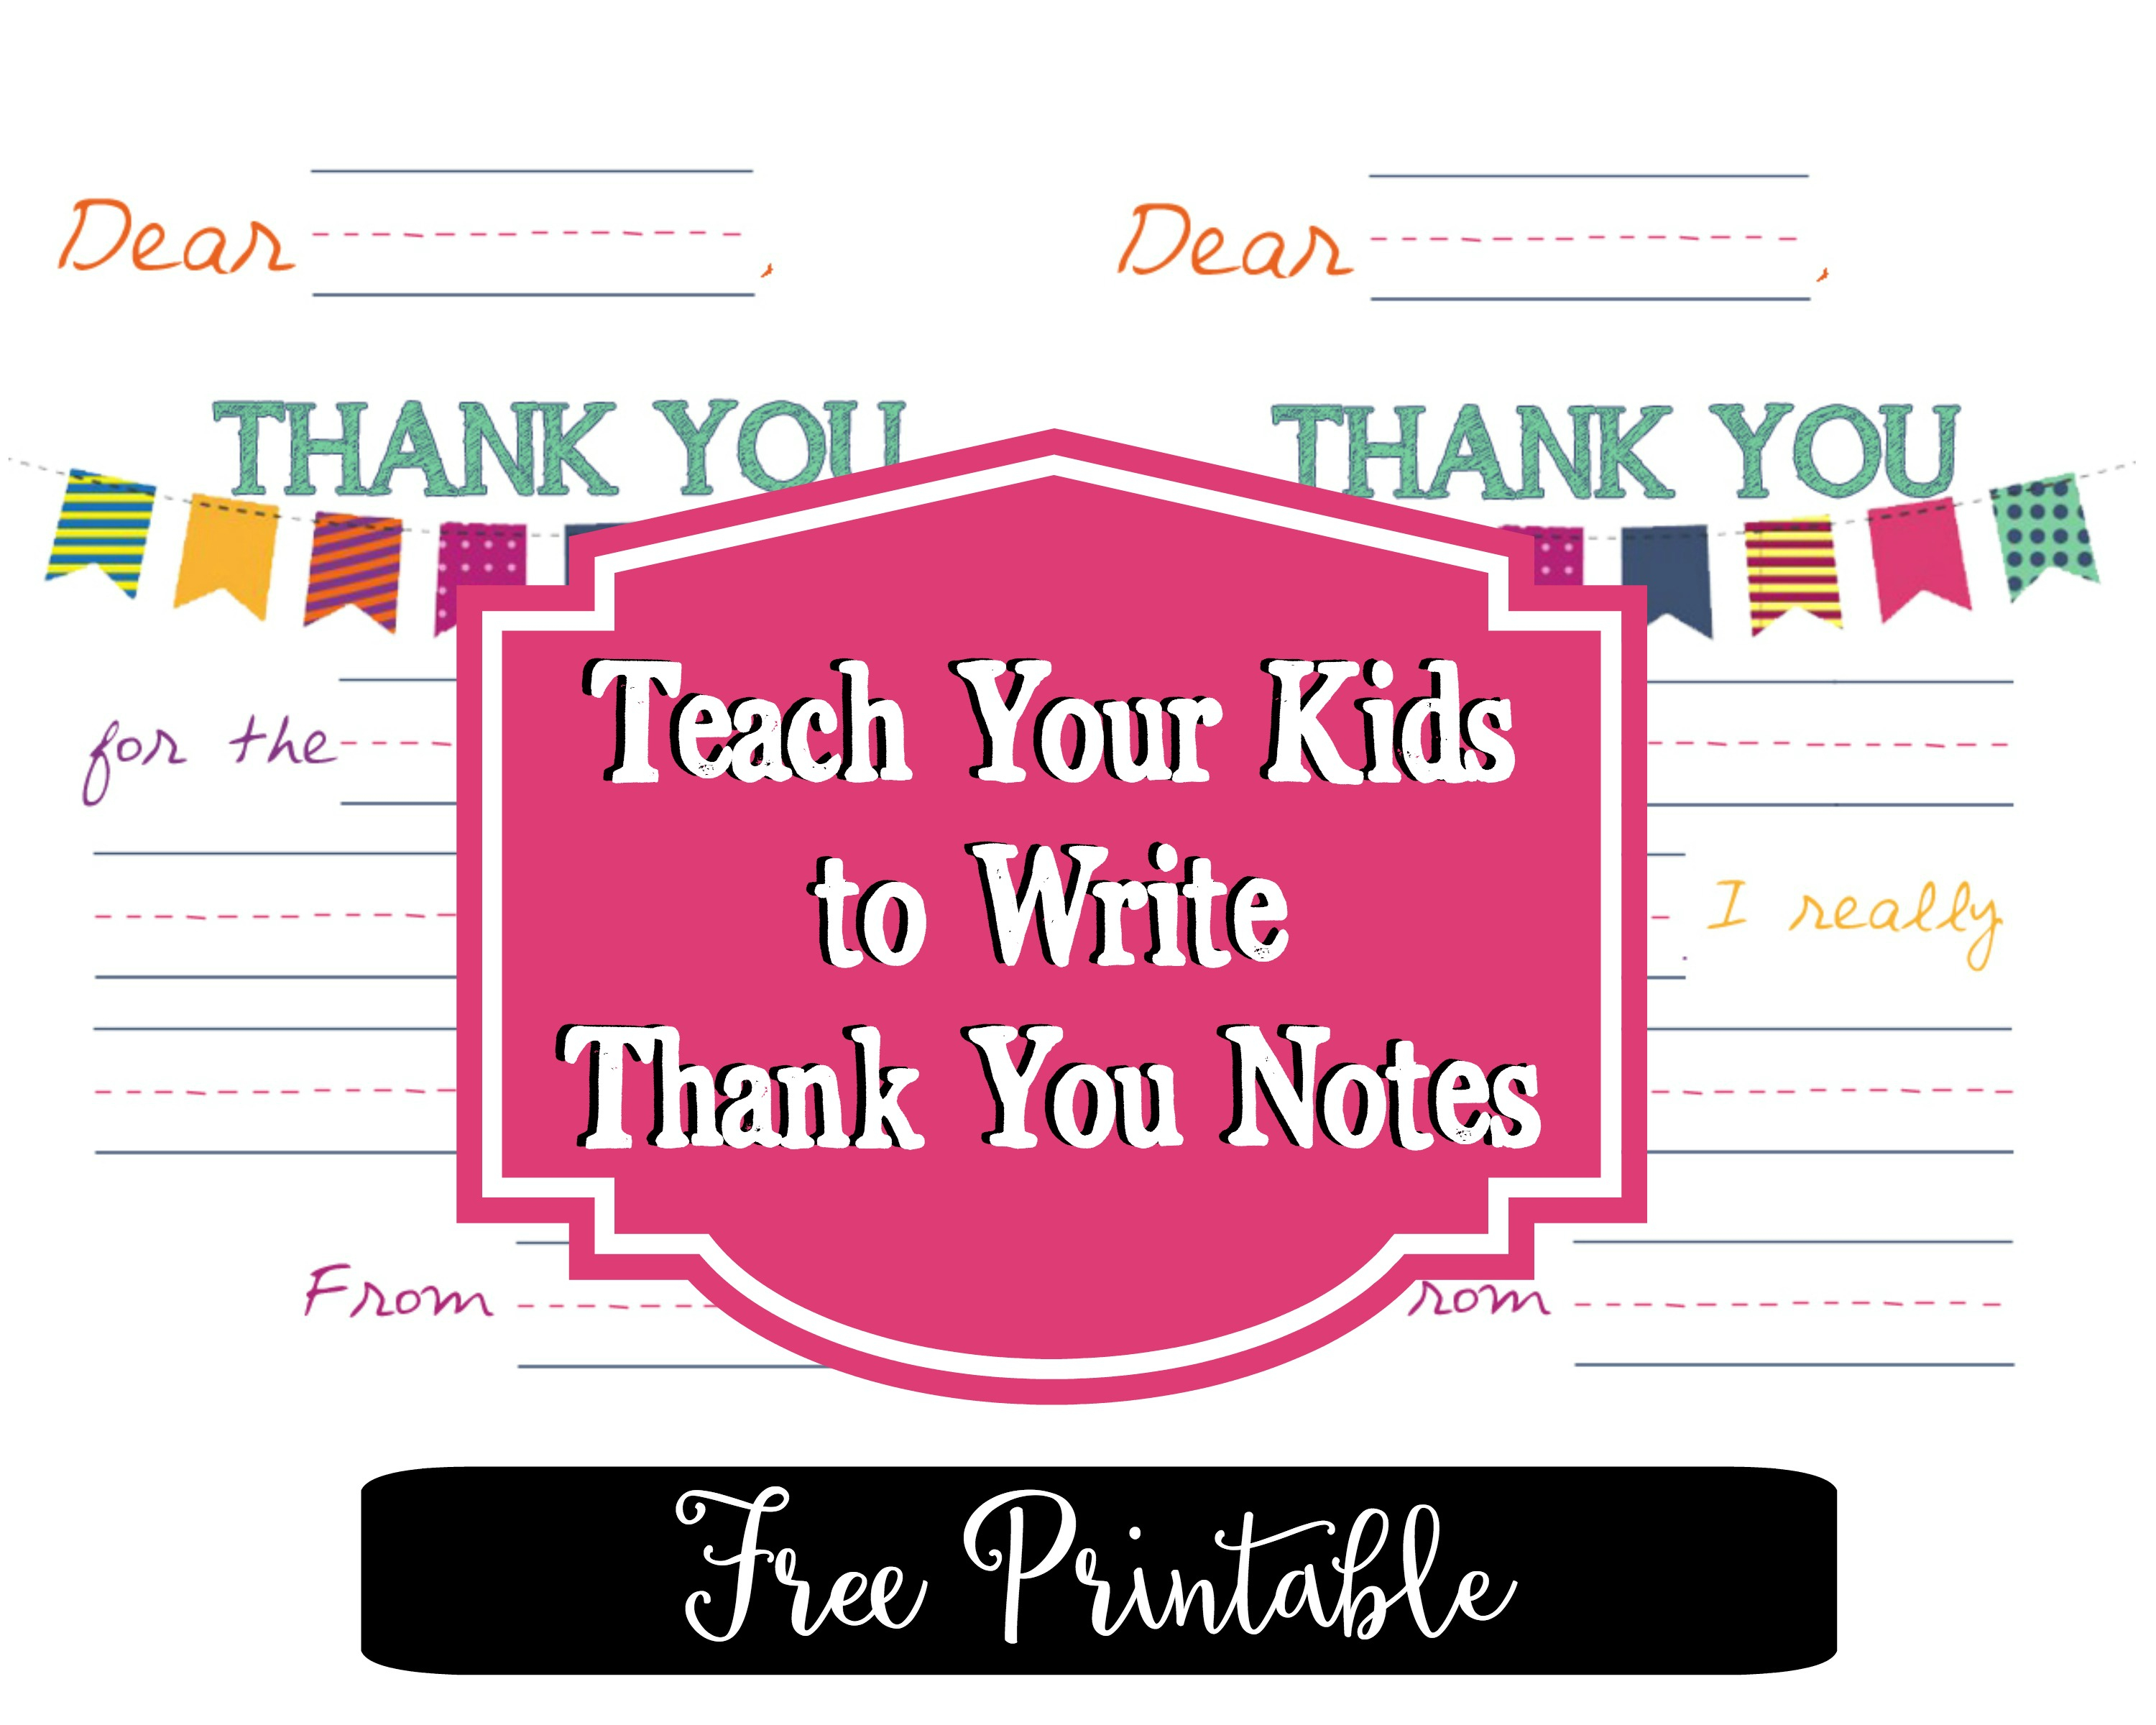 Printable Thank You Notes That Will Make Your Kids Feel Like Rockstars - Free Printable Thank You